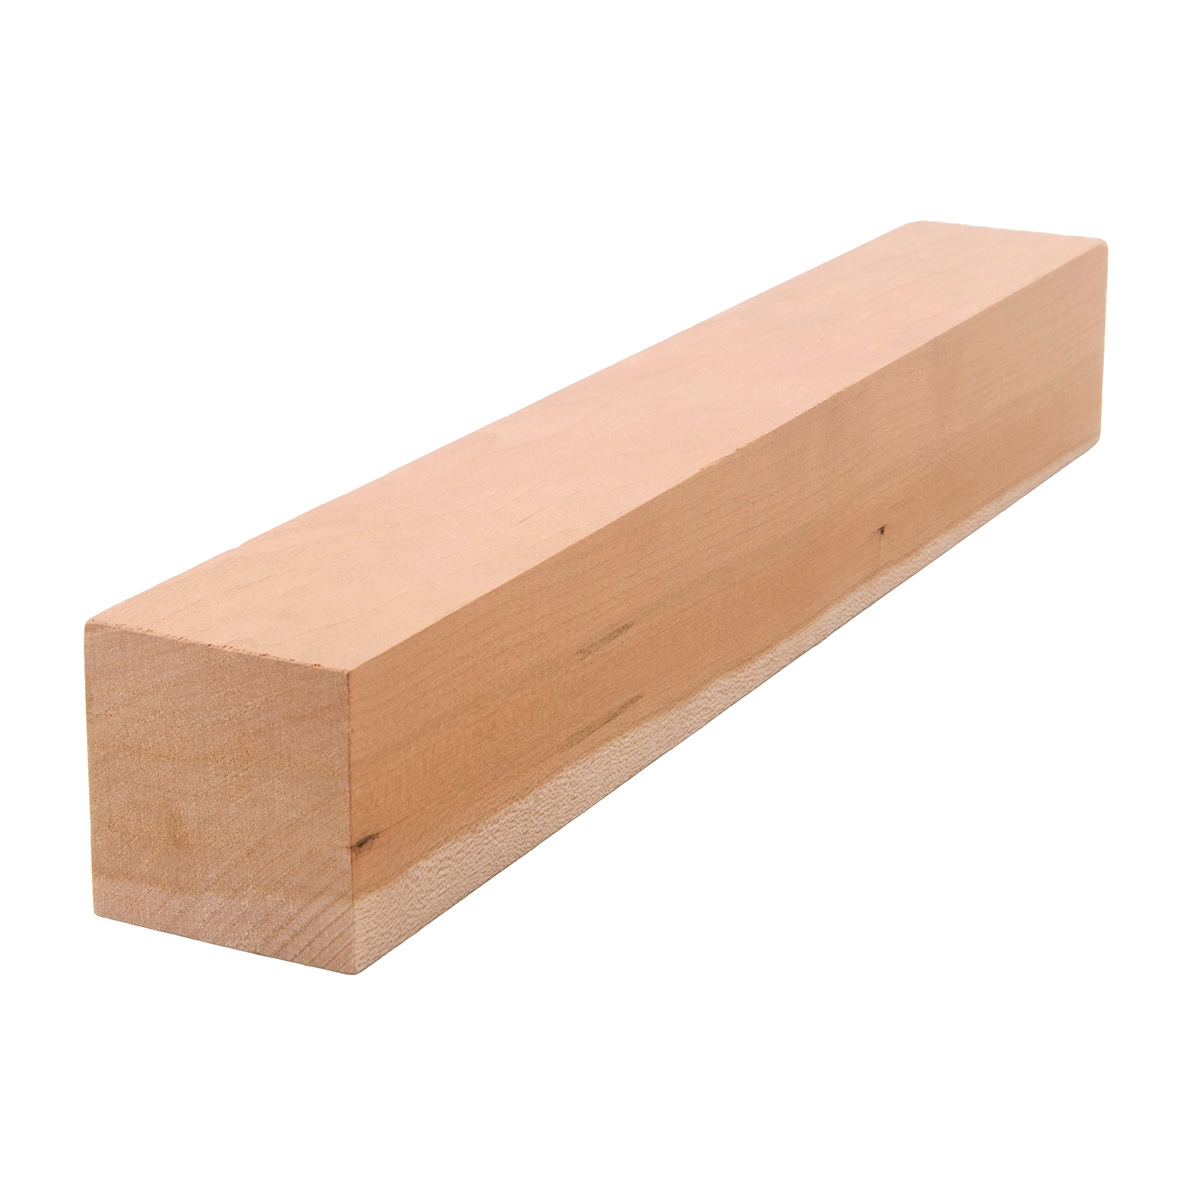 2x2 (13/4" x 13/4") Cherry S4S Lumber & Square Stock from Baird Brothers